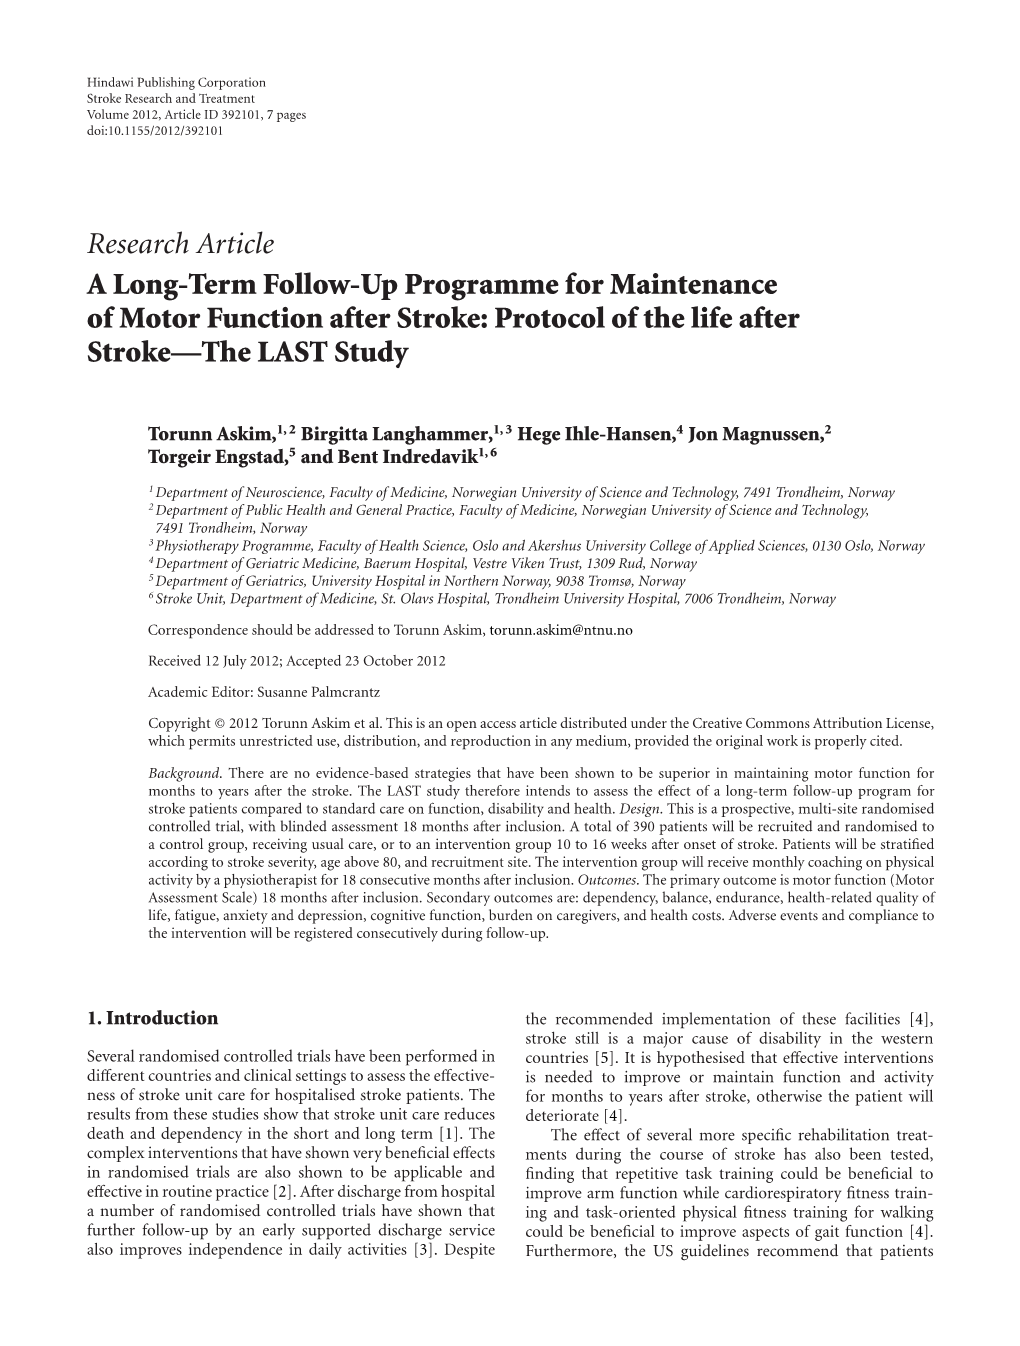 A Long-Term Follow-Up Programme for Maintenance of Motor Function After Stroke: Protocol of the Life After Stroke—The LAST Study